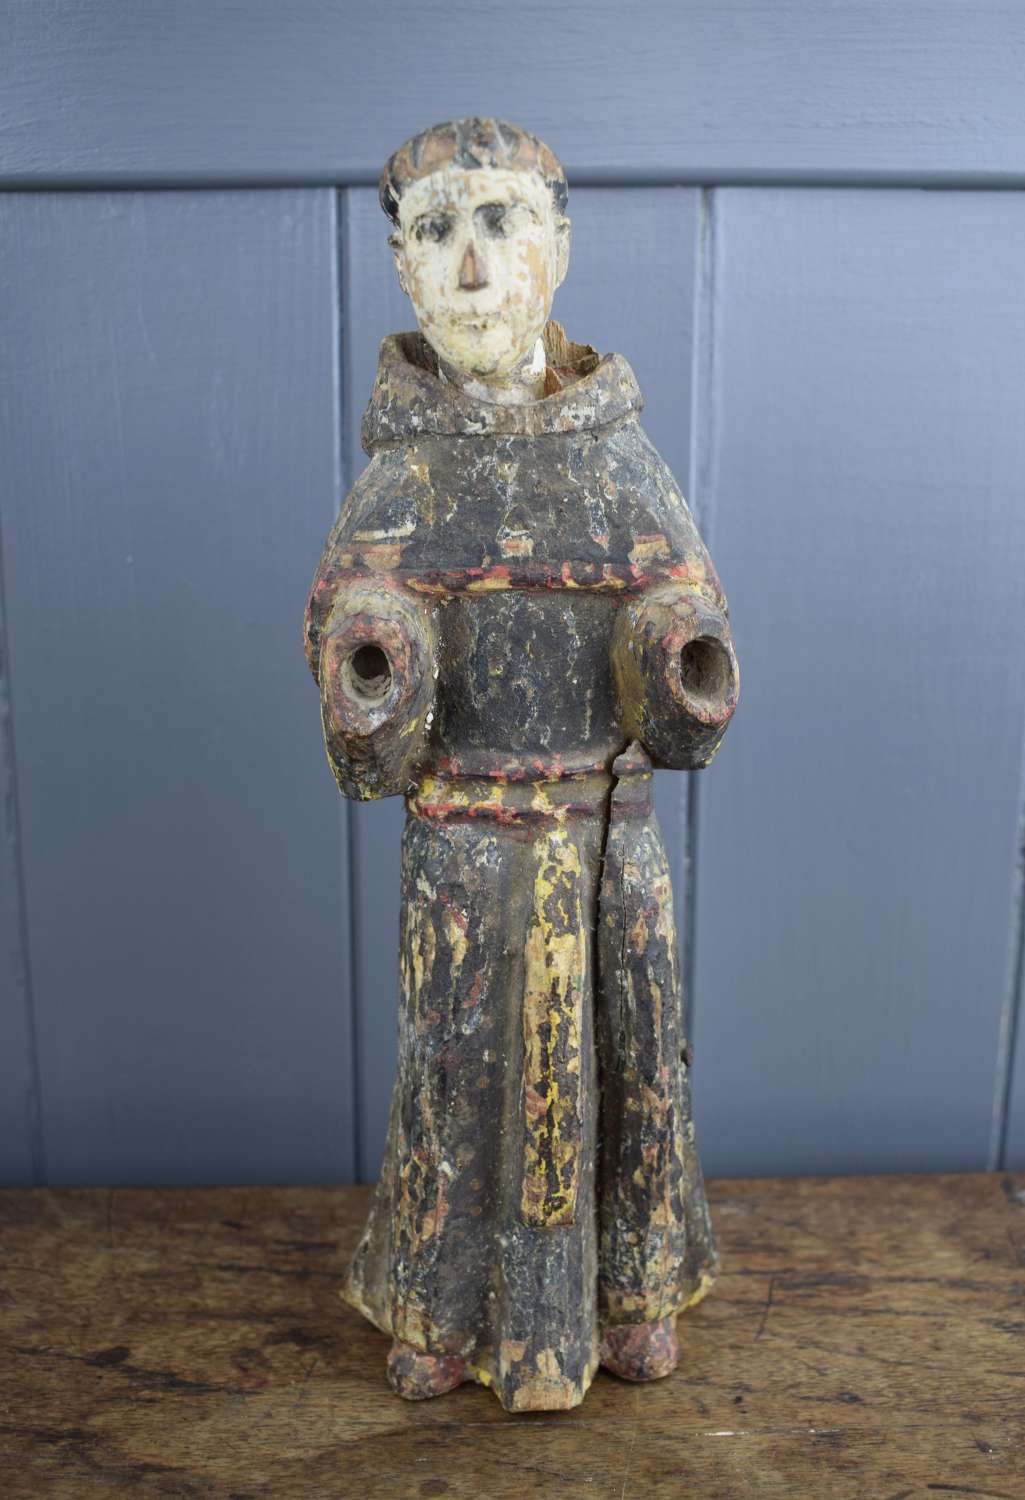 Spanish Colonial Carved Figure of a Monk